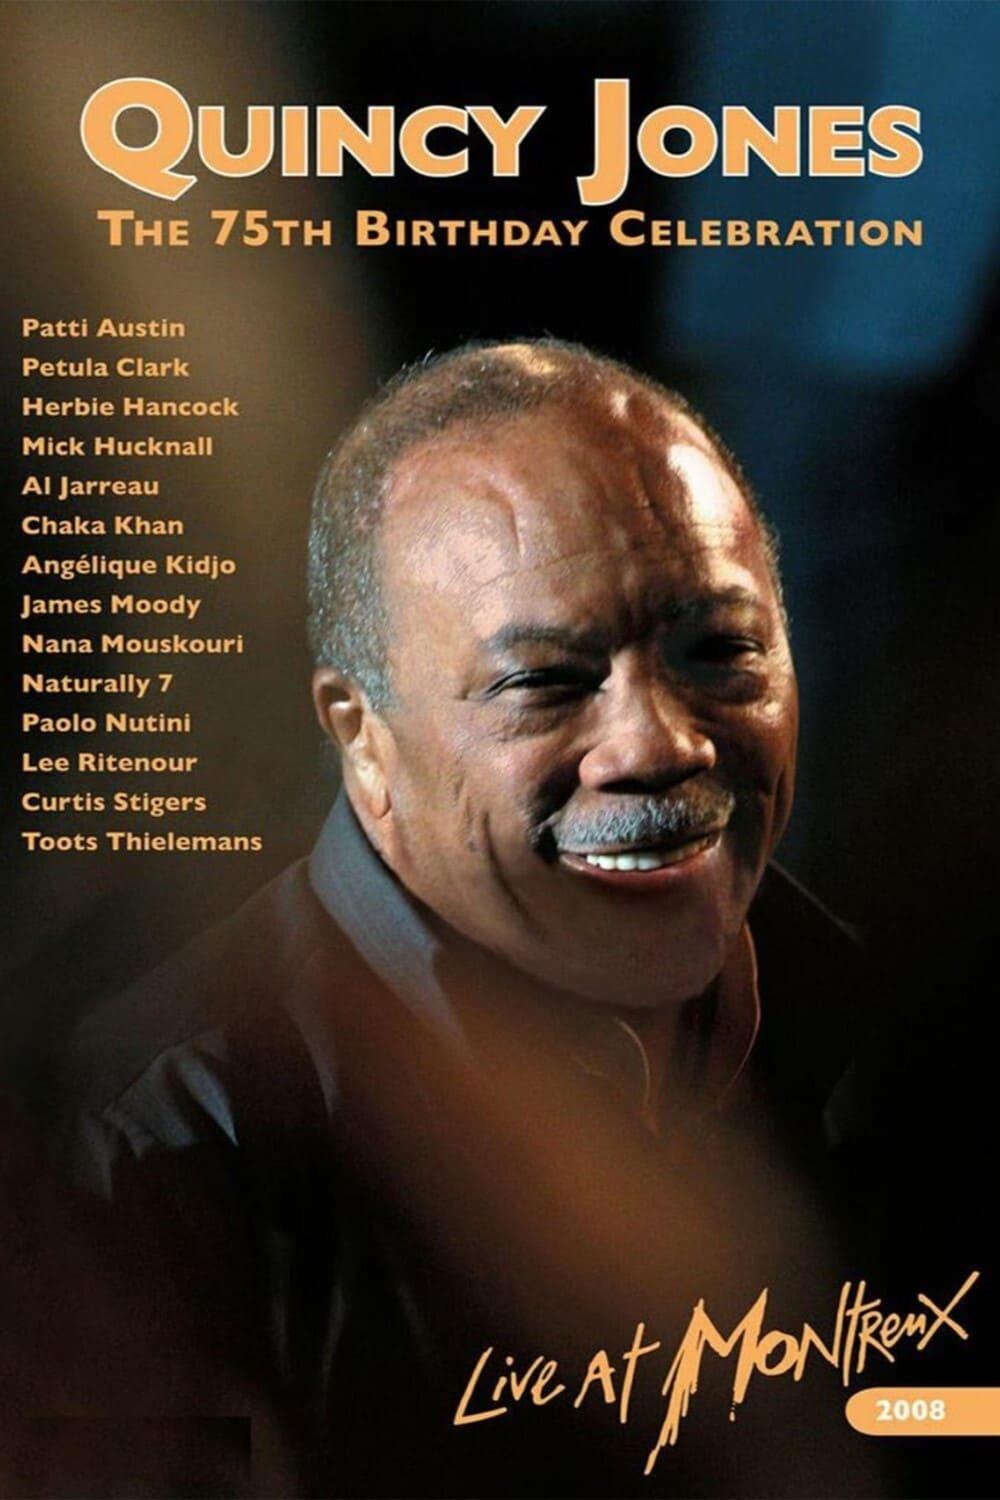 Quincy Jones : 75th Birthday Celebration Live at Montreux poster